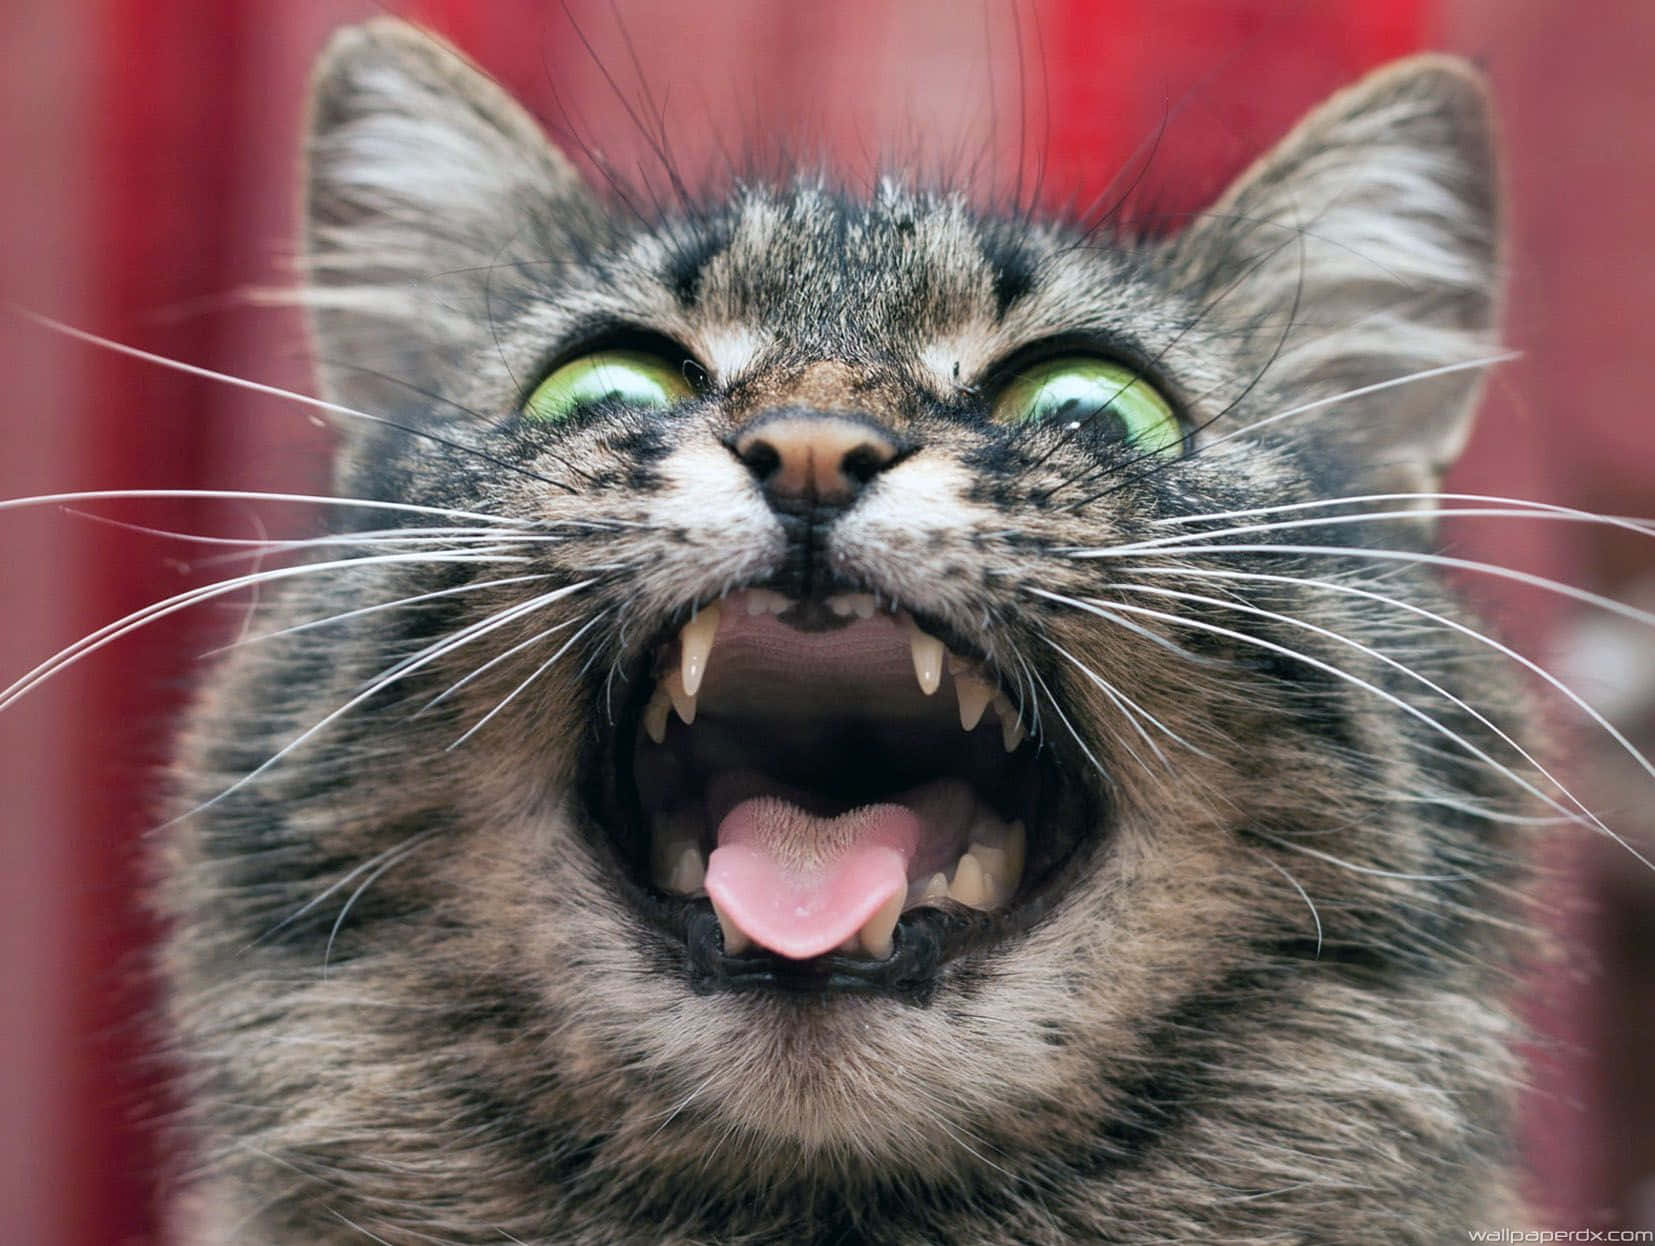 A Cat Is Yelling And Showing Its Teeth